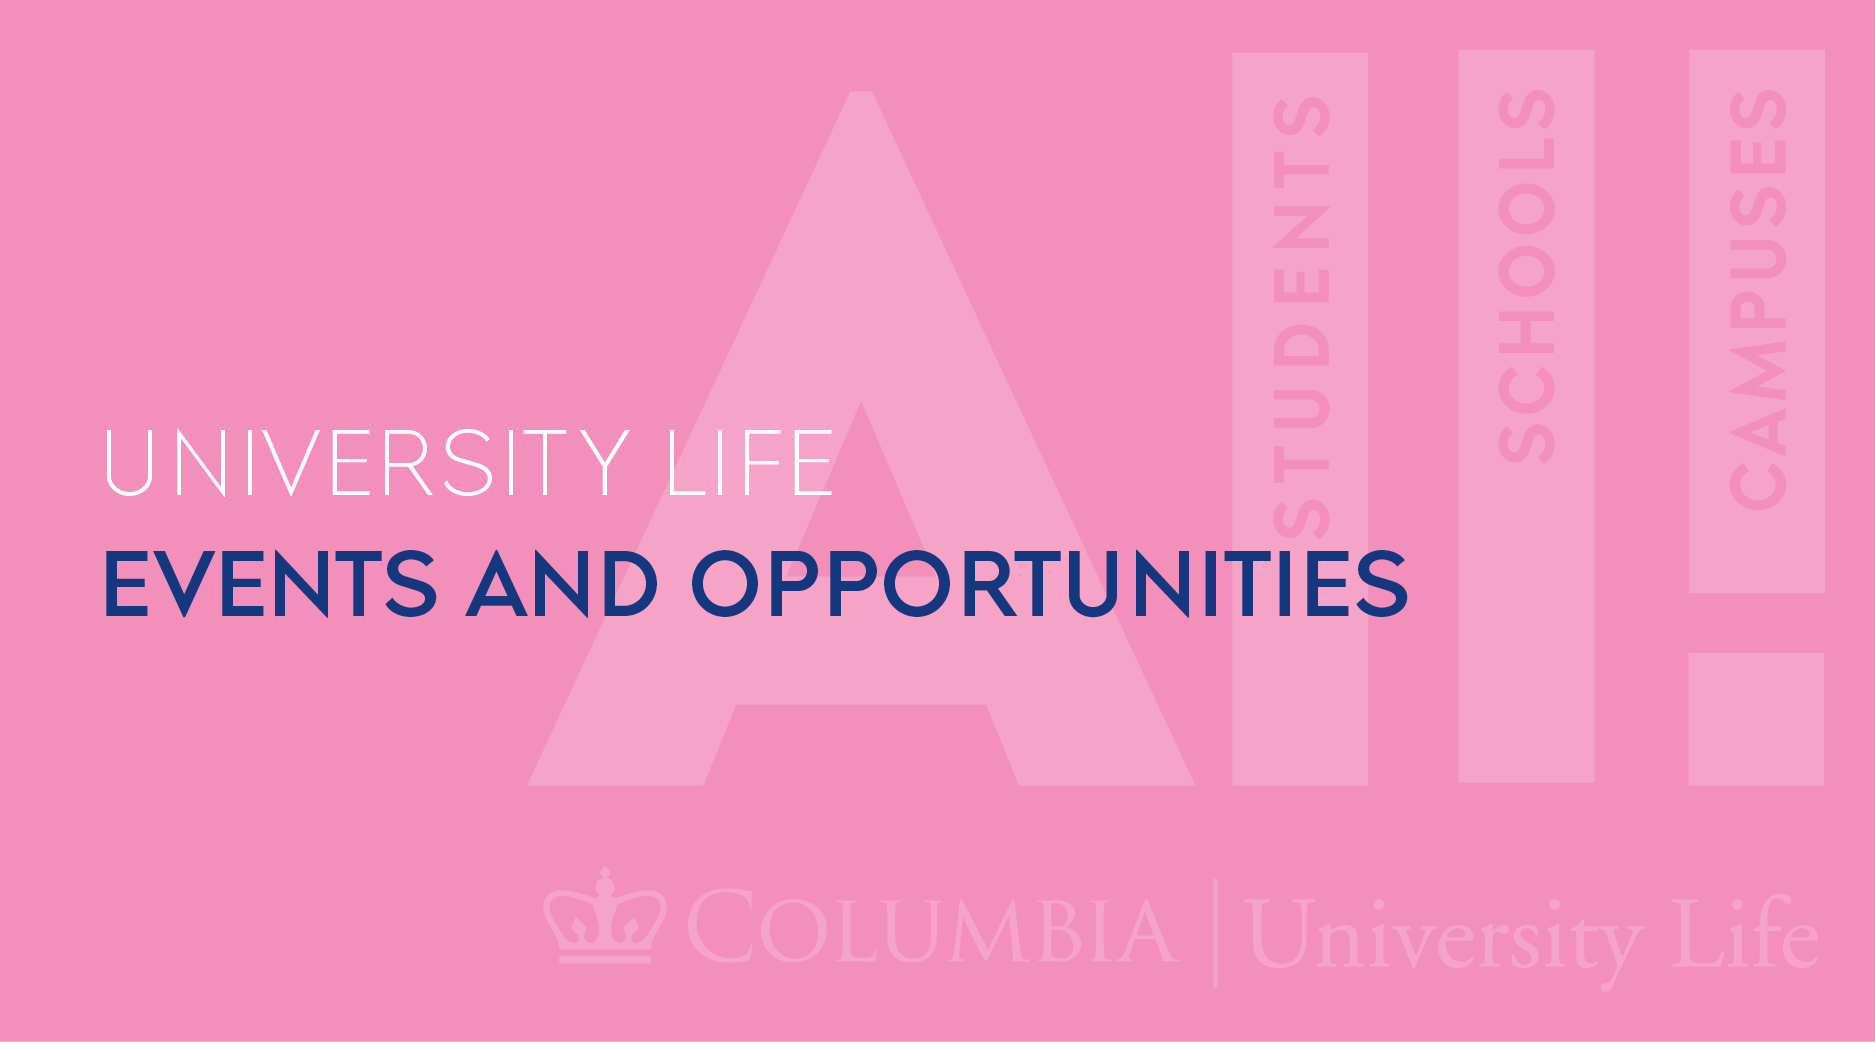 University Life
Events and Opportunities
All! Students, Schools, Campuses